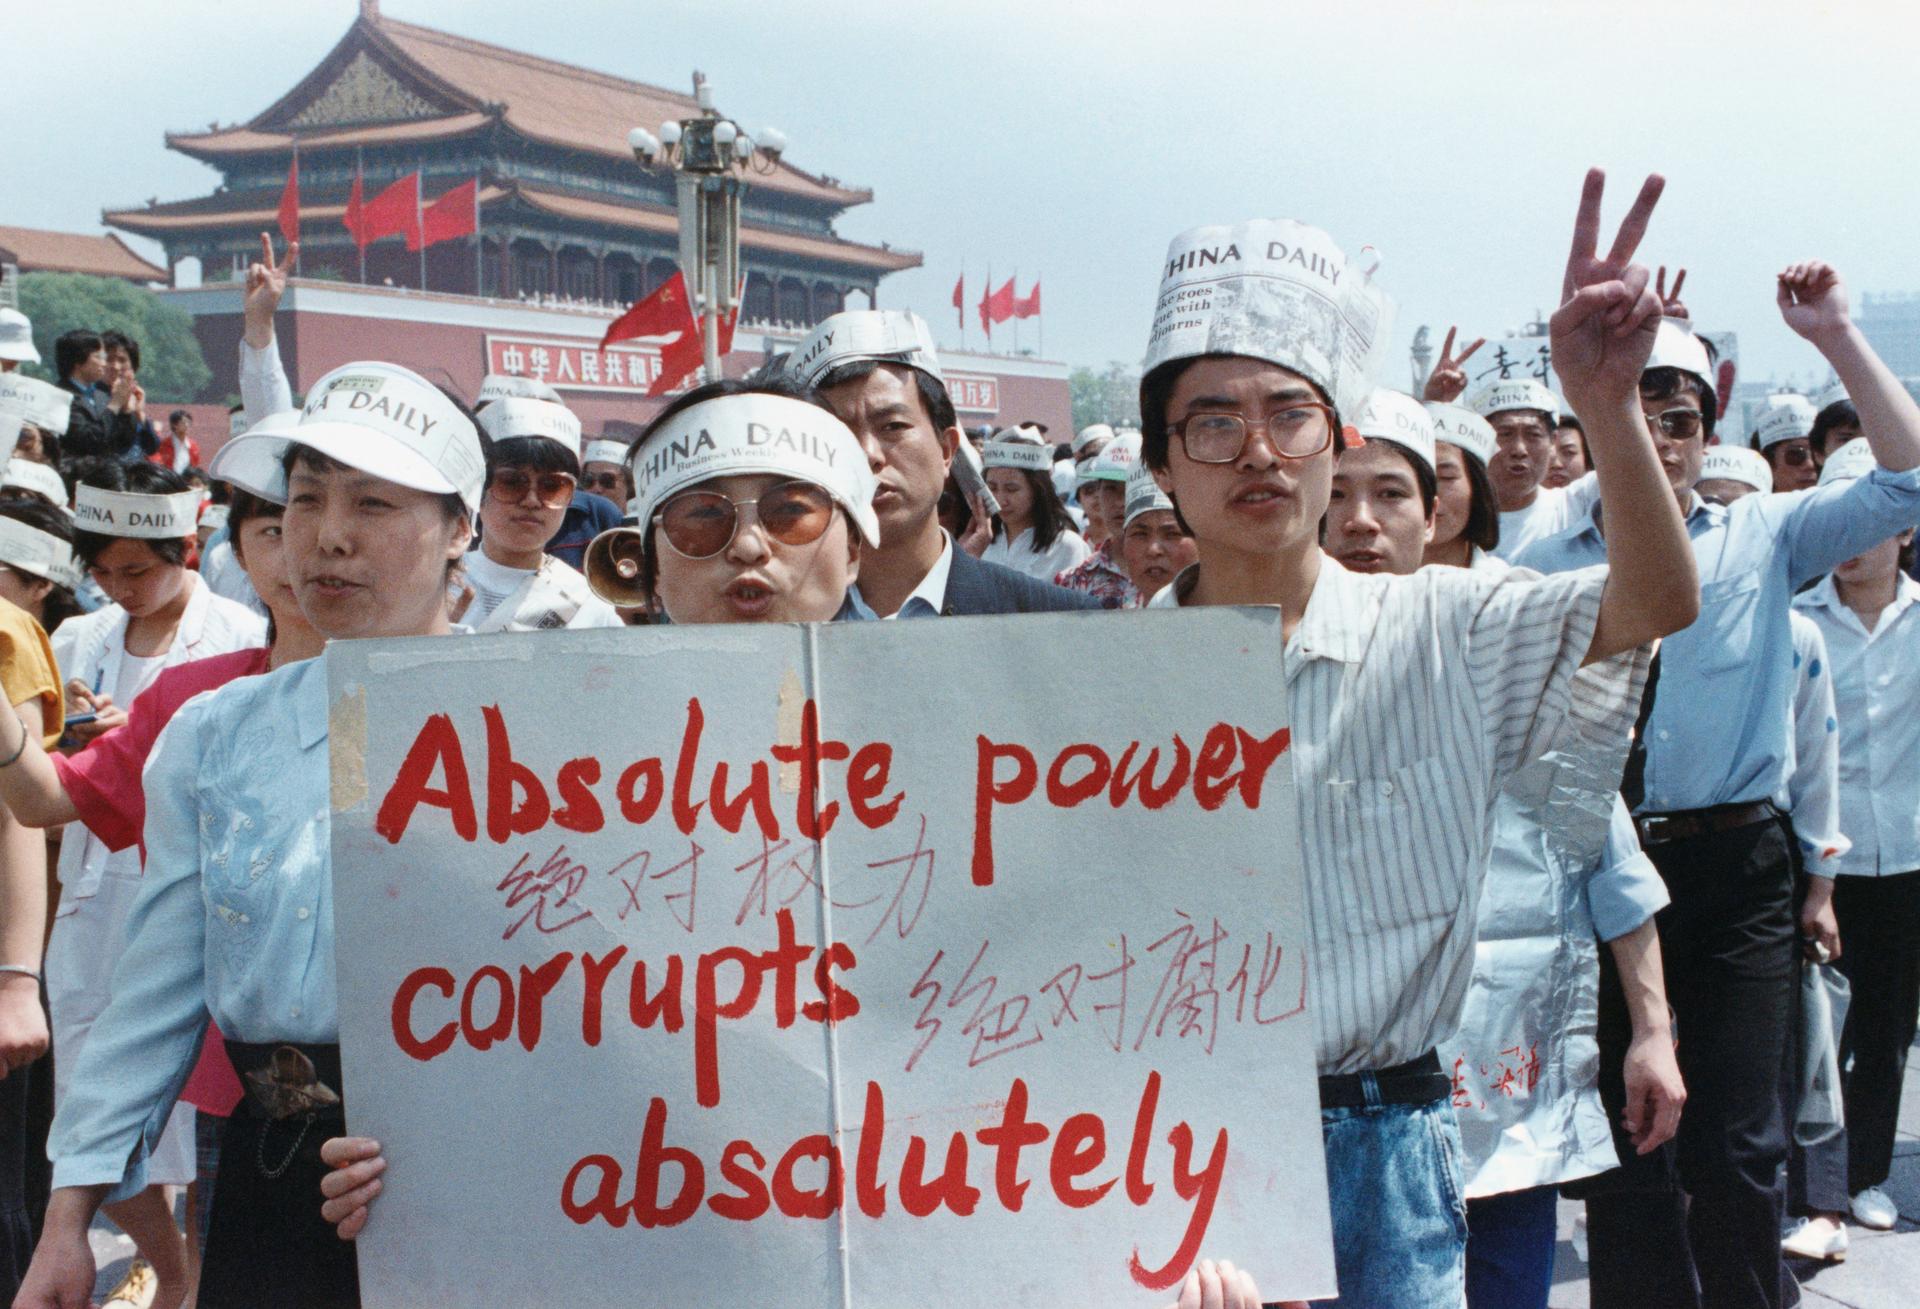 A group of journalists supports the pro-democracy protest in Tiananmen Square, Beijing May 17, 1989. 